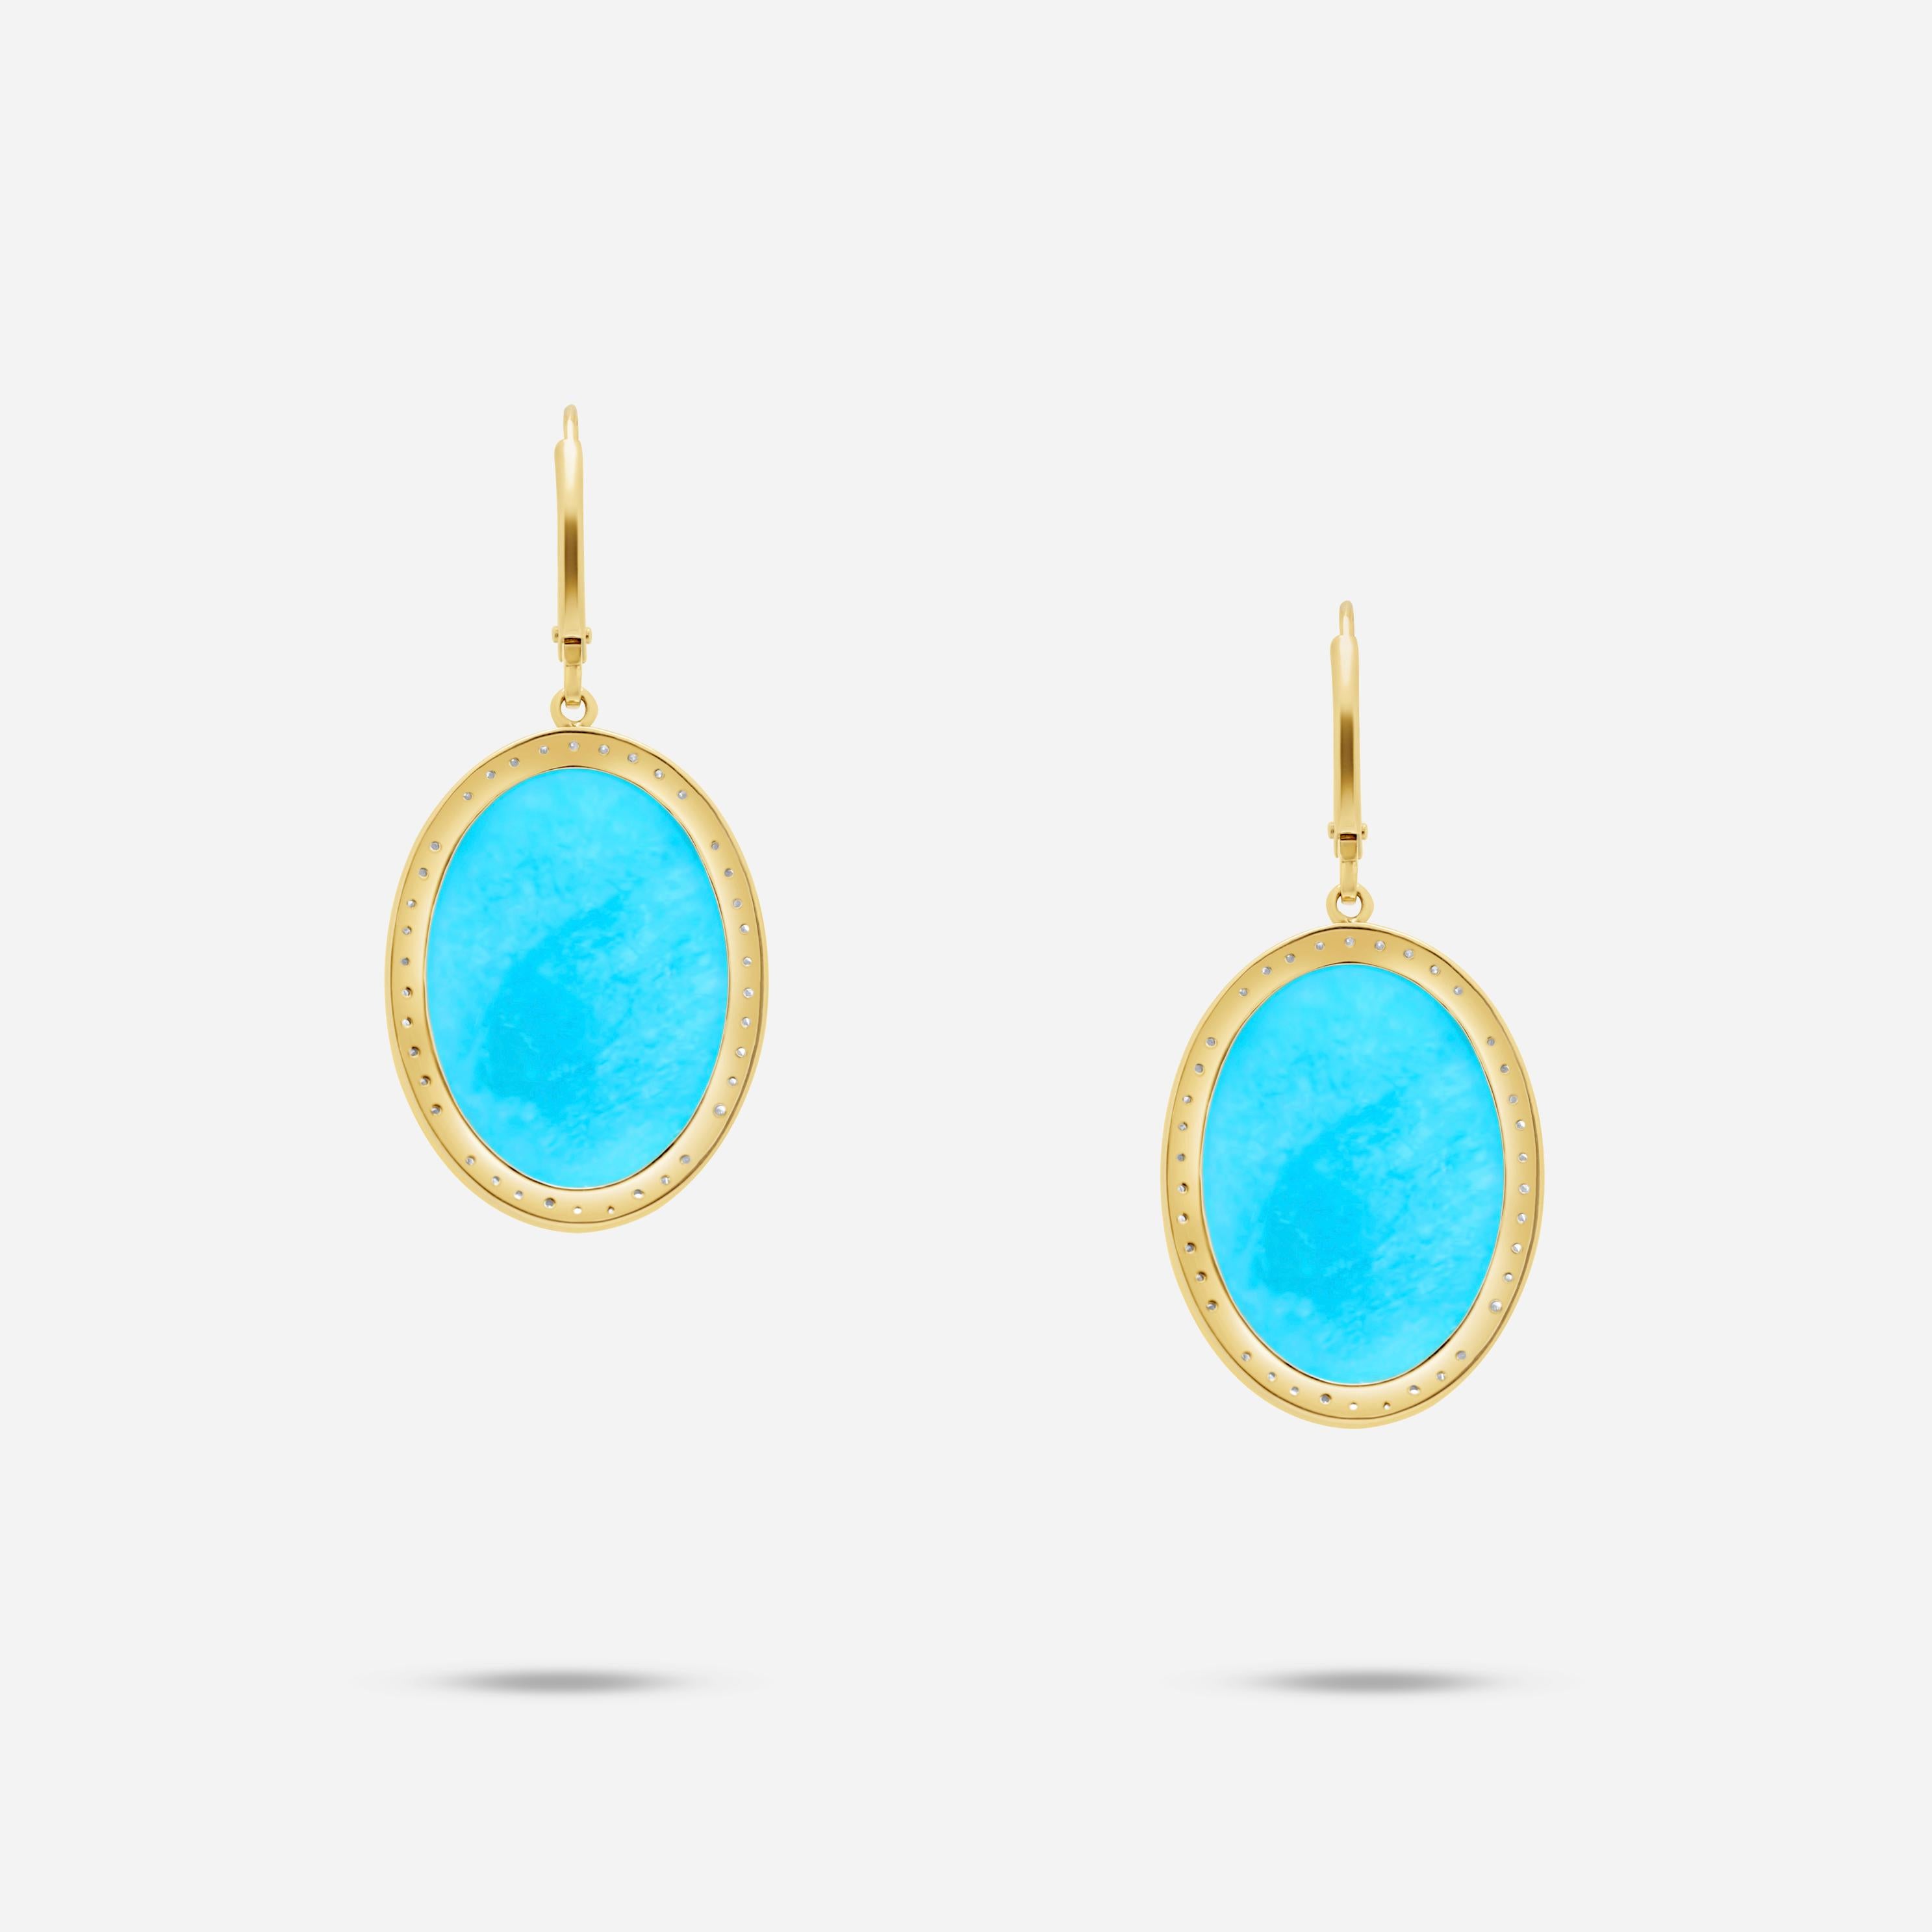 Blue Turquoise Oval Shape Cabochon Diamond Halo 18K Yellow Gold Drop Earrings
18 Karat Yellow Gold
2.00 CT Diamonds
Genuine Turquoise Cabochon Gemstones

Important Information:
Please note that this item will take 2-4 weeks to deliver - it is